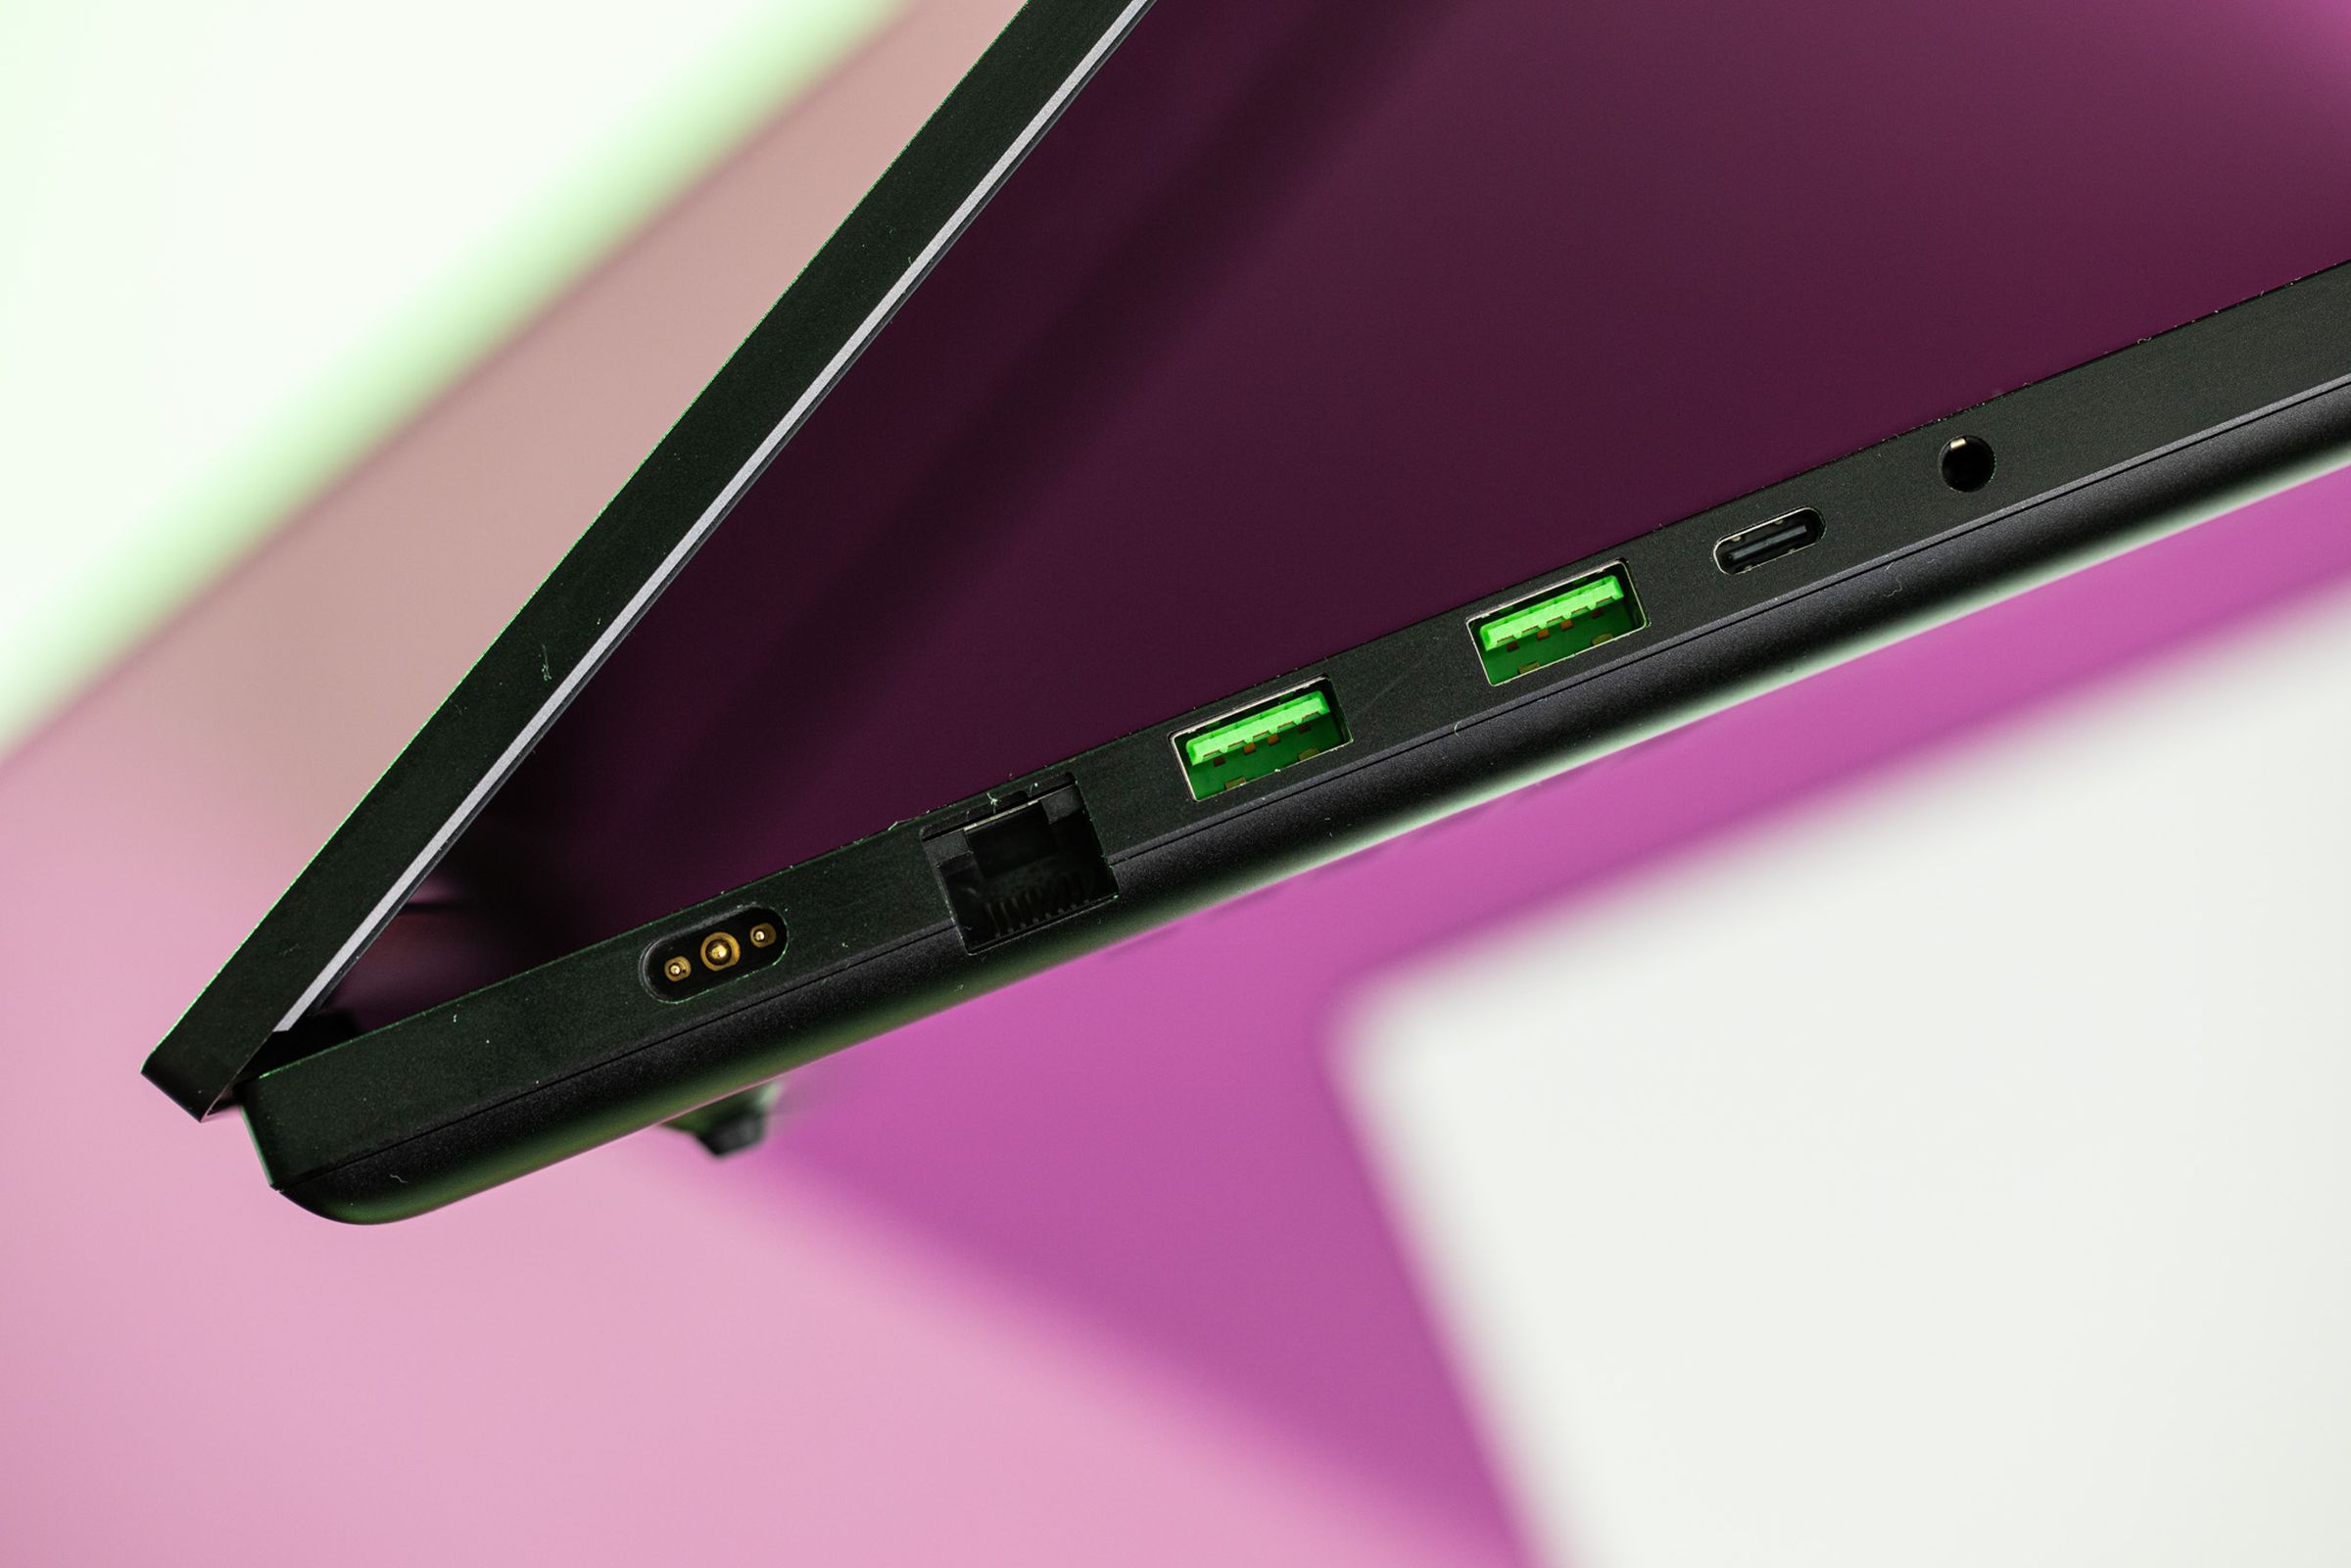 The ports on the left side of the Razer Blade 18.